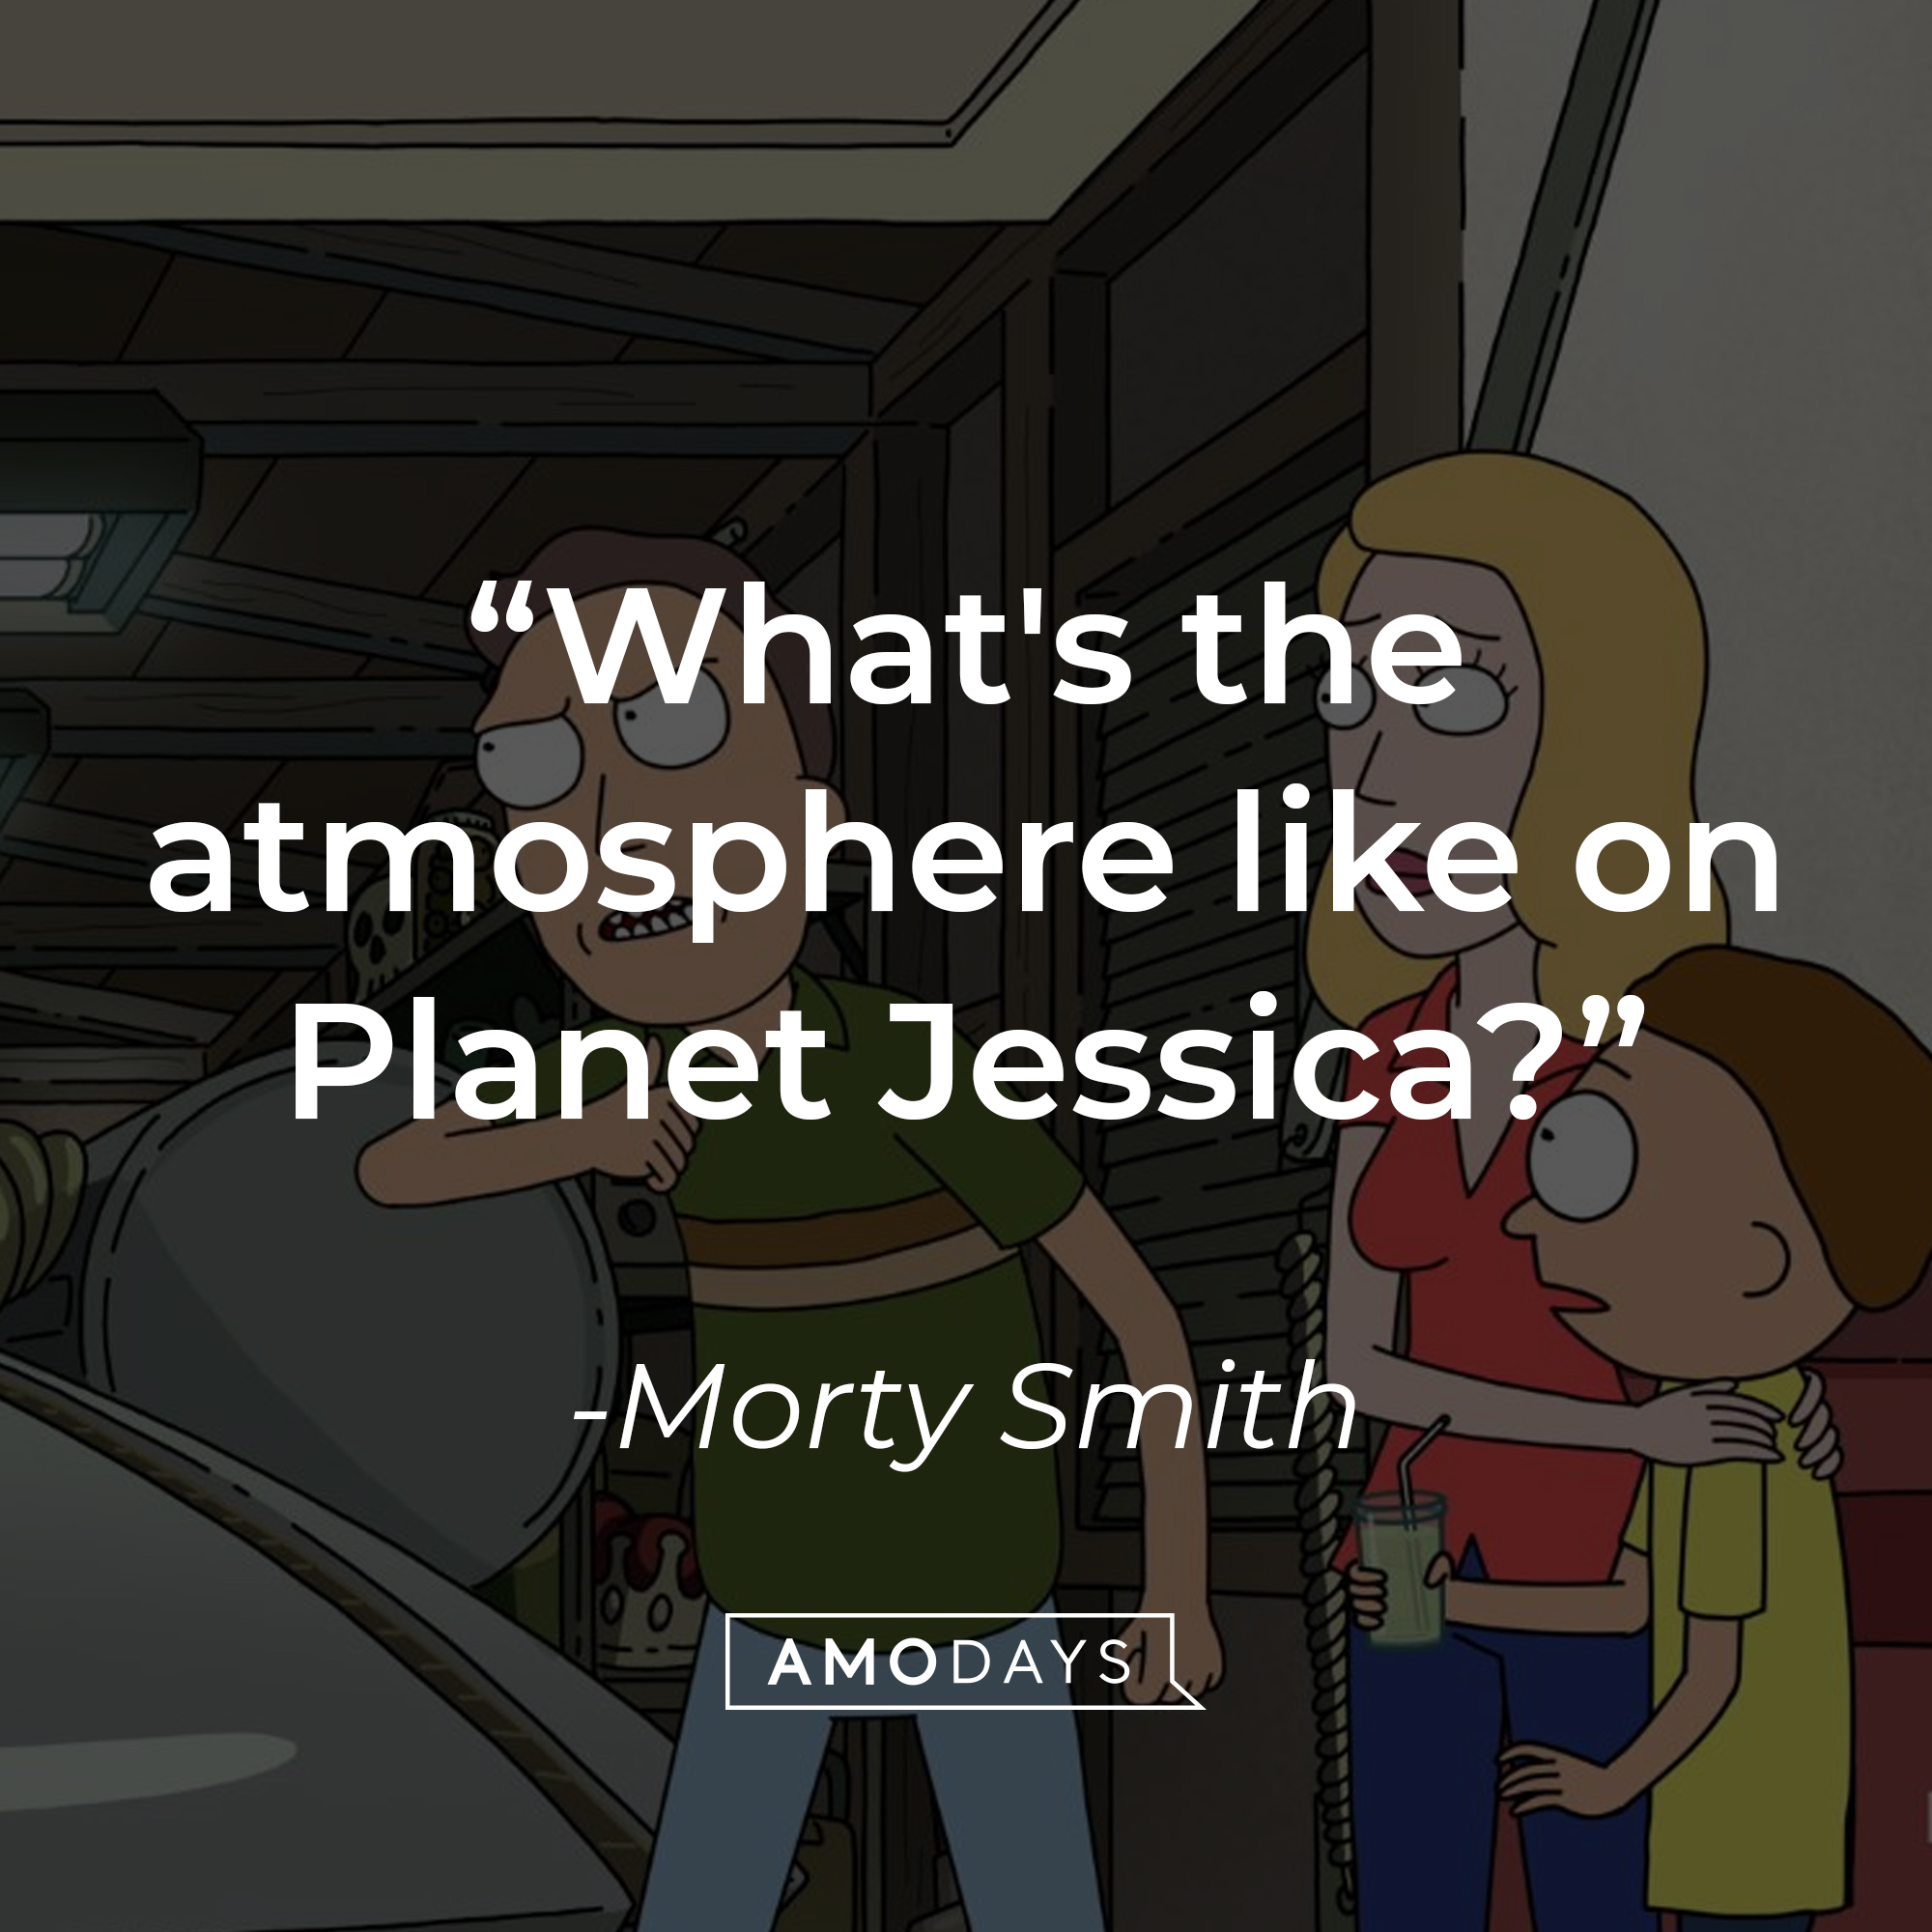 Beth, Morty, and Jerry Smith, with Morty’s quotes: "What's the atmosphere like on planet Jessica?" | Source: Facebook.com/RickandMorty